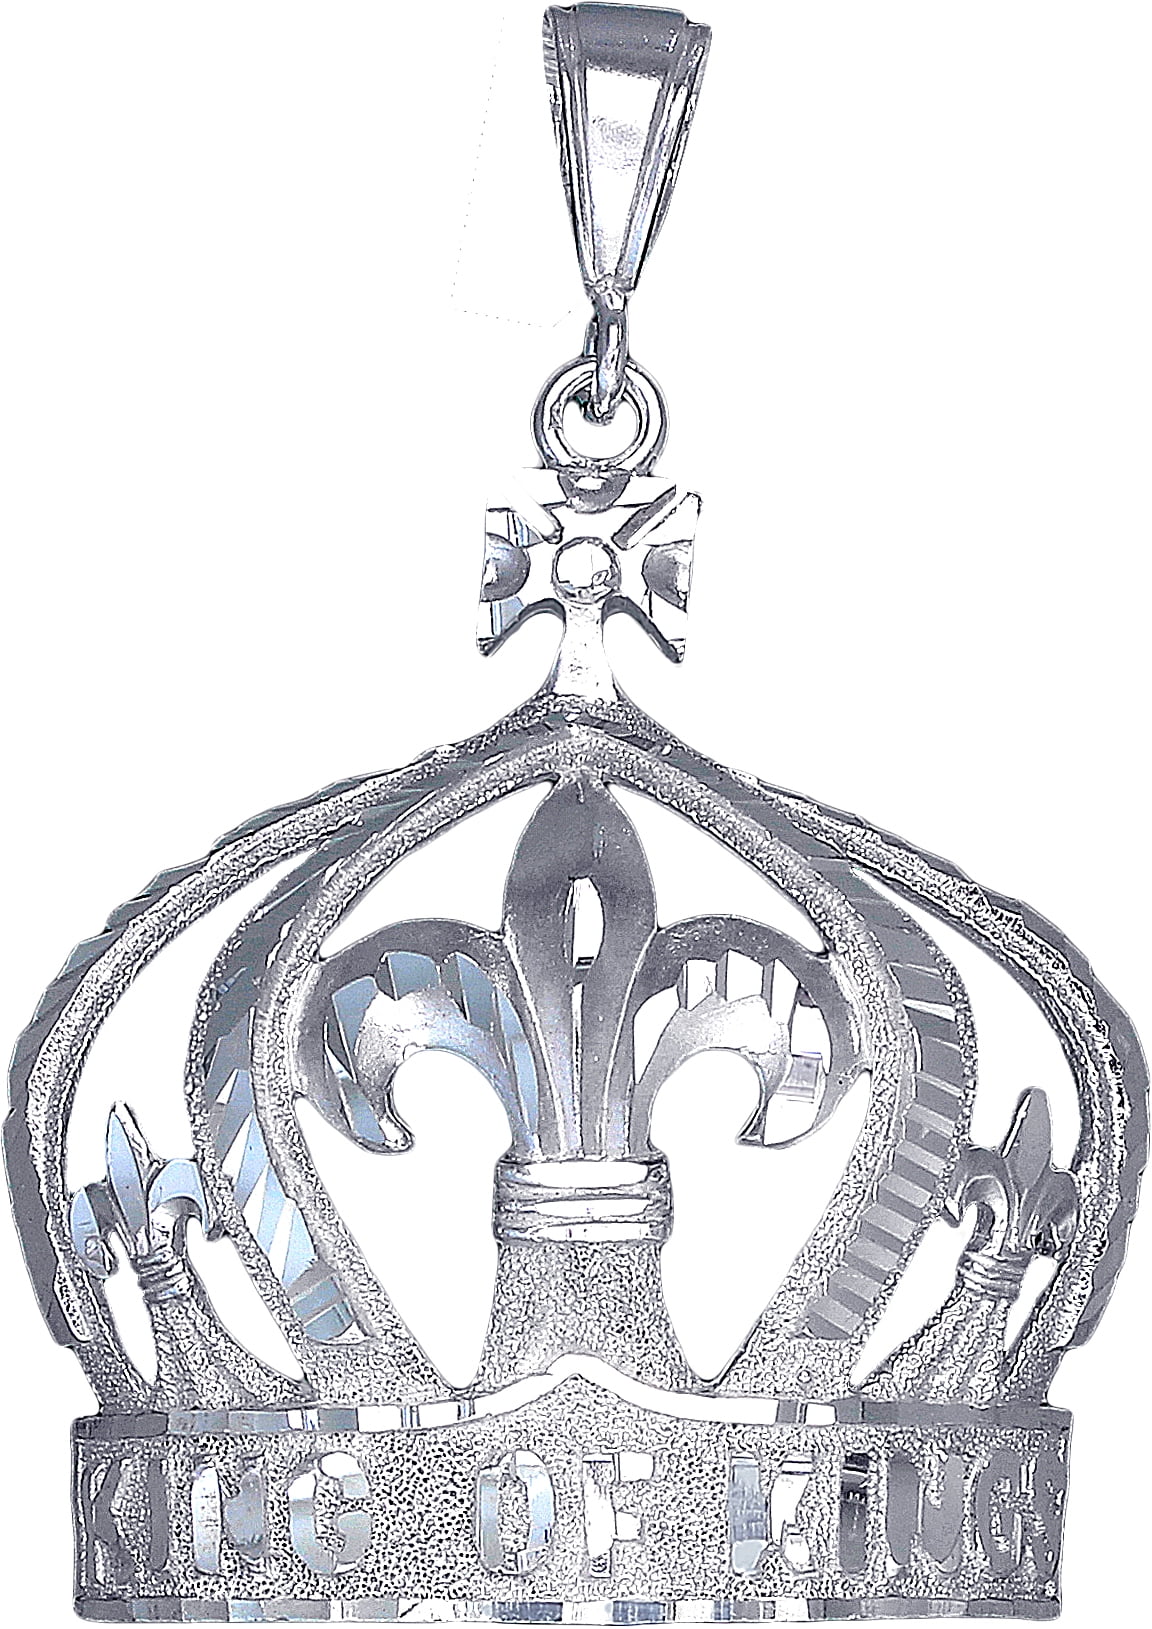 999 Pure Silver Crown Necklace